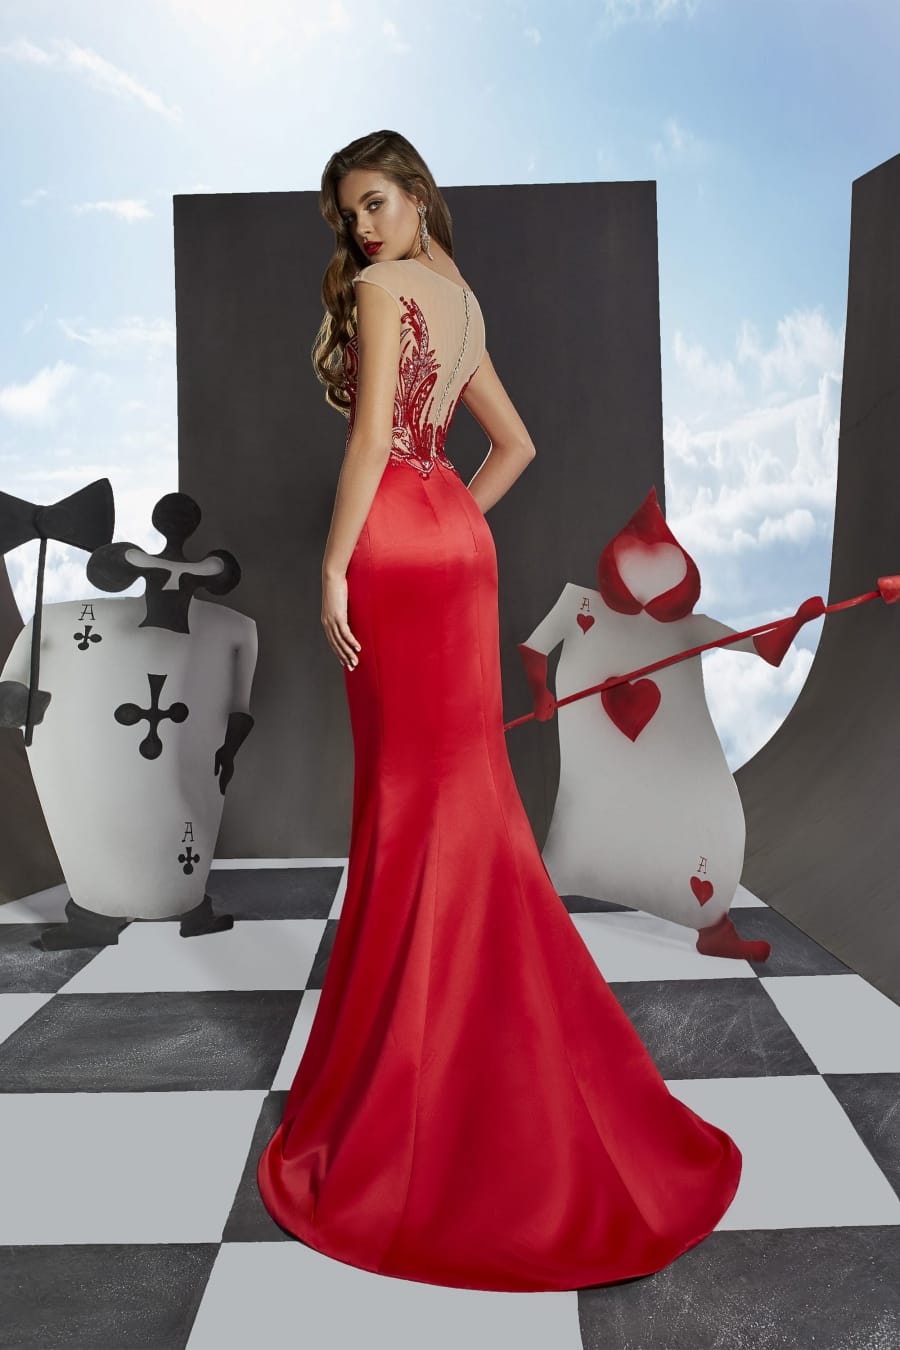 Back view of Ariamo 6204530000 Gown showing transparent back - Rofial Beauty